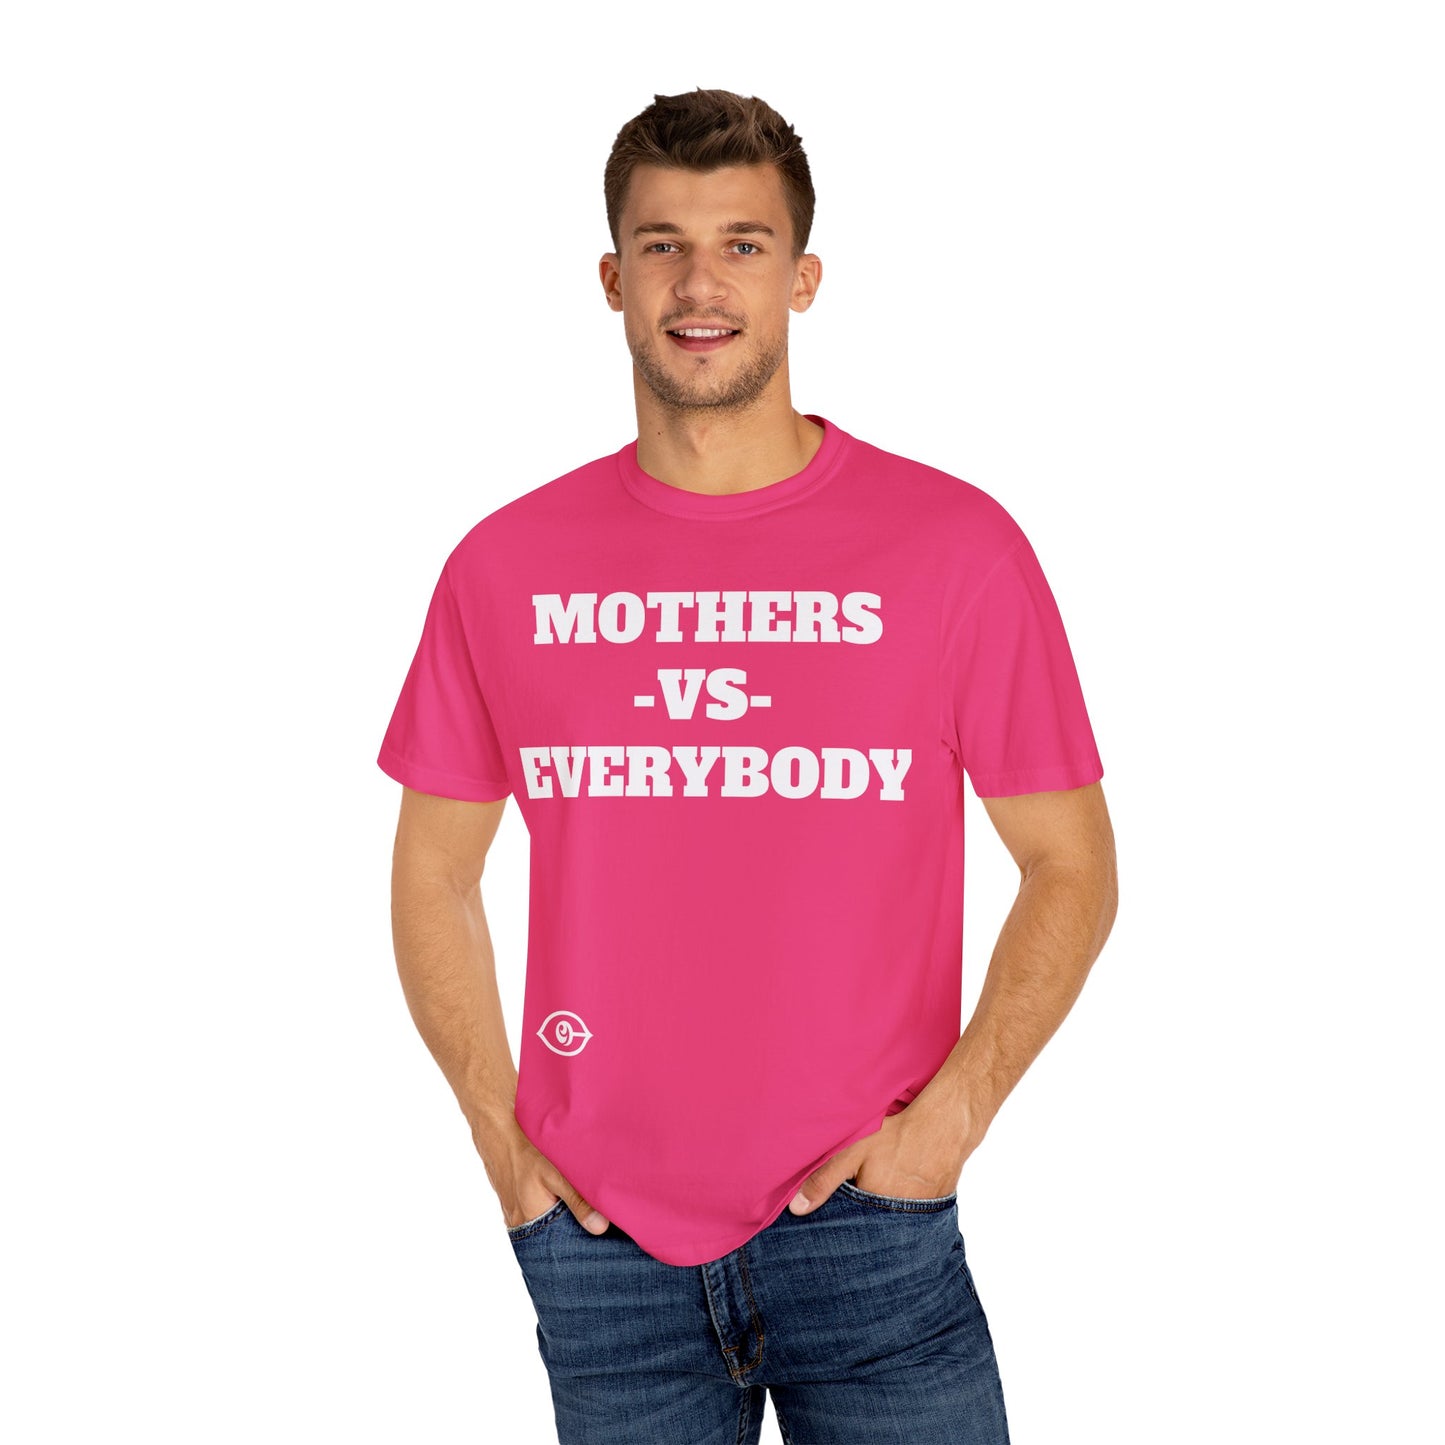 CYVISION MOTHER'S DAY MOTHERS -VS- EVERYBODY TSHIRT